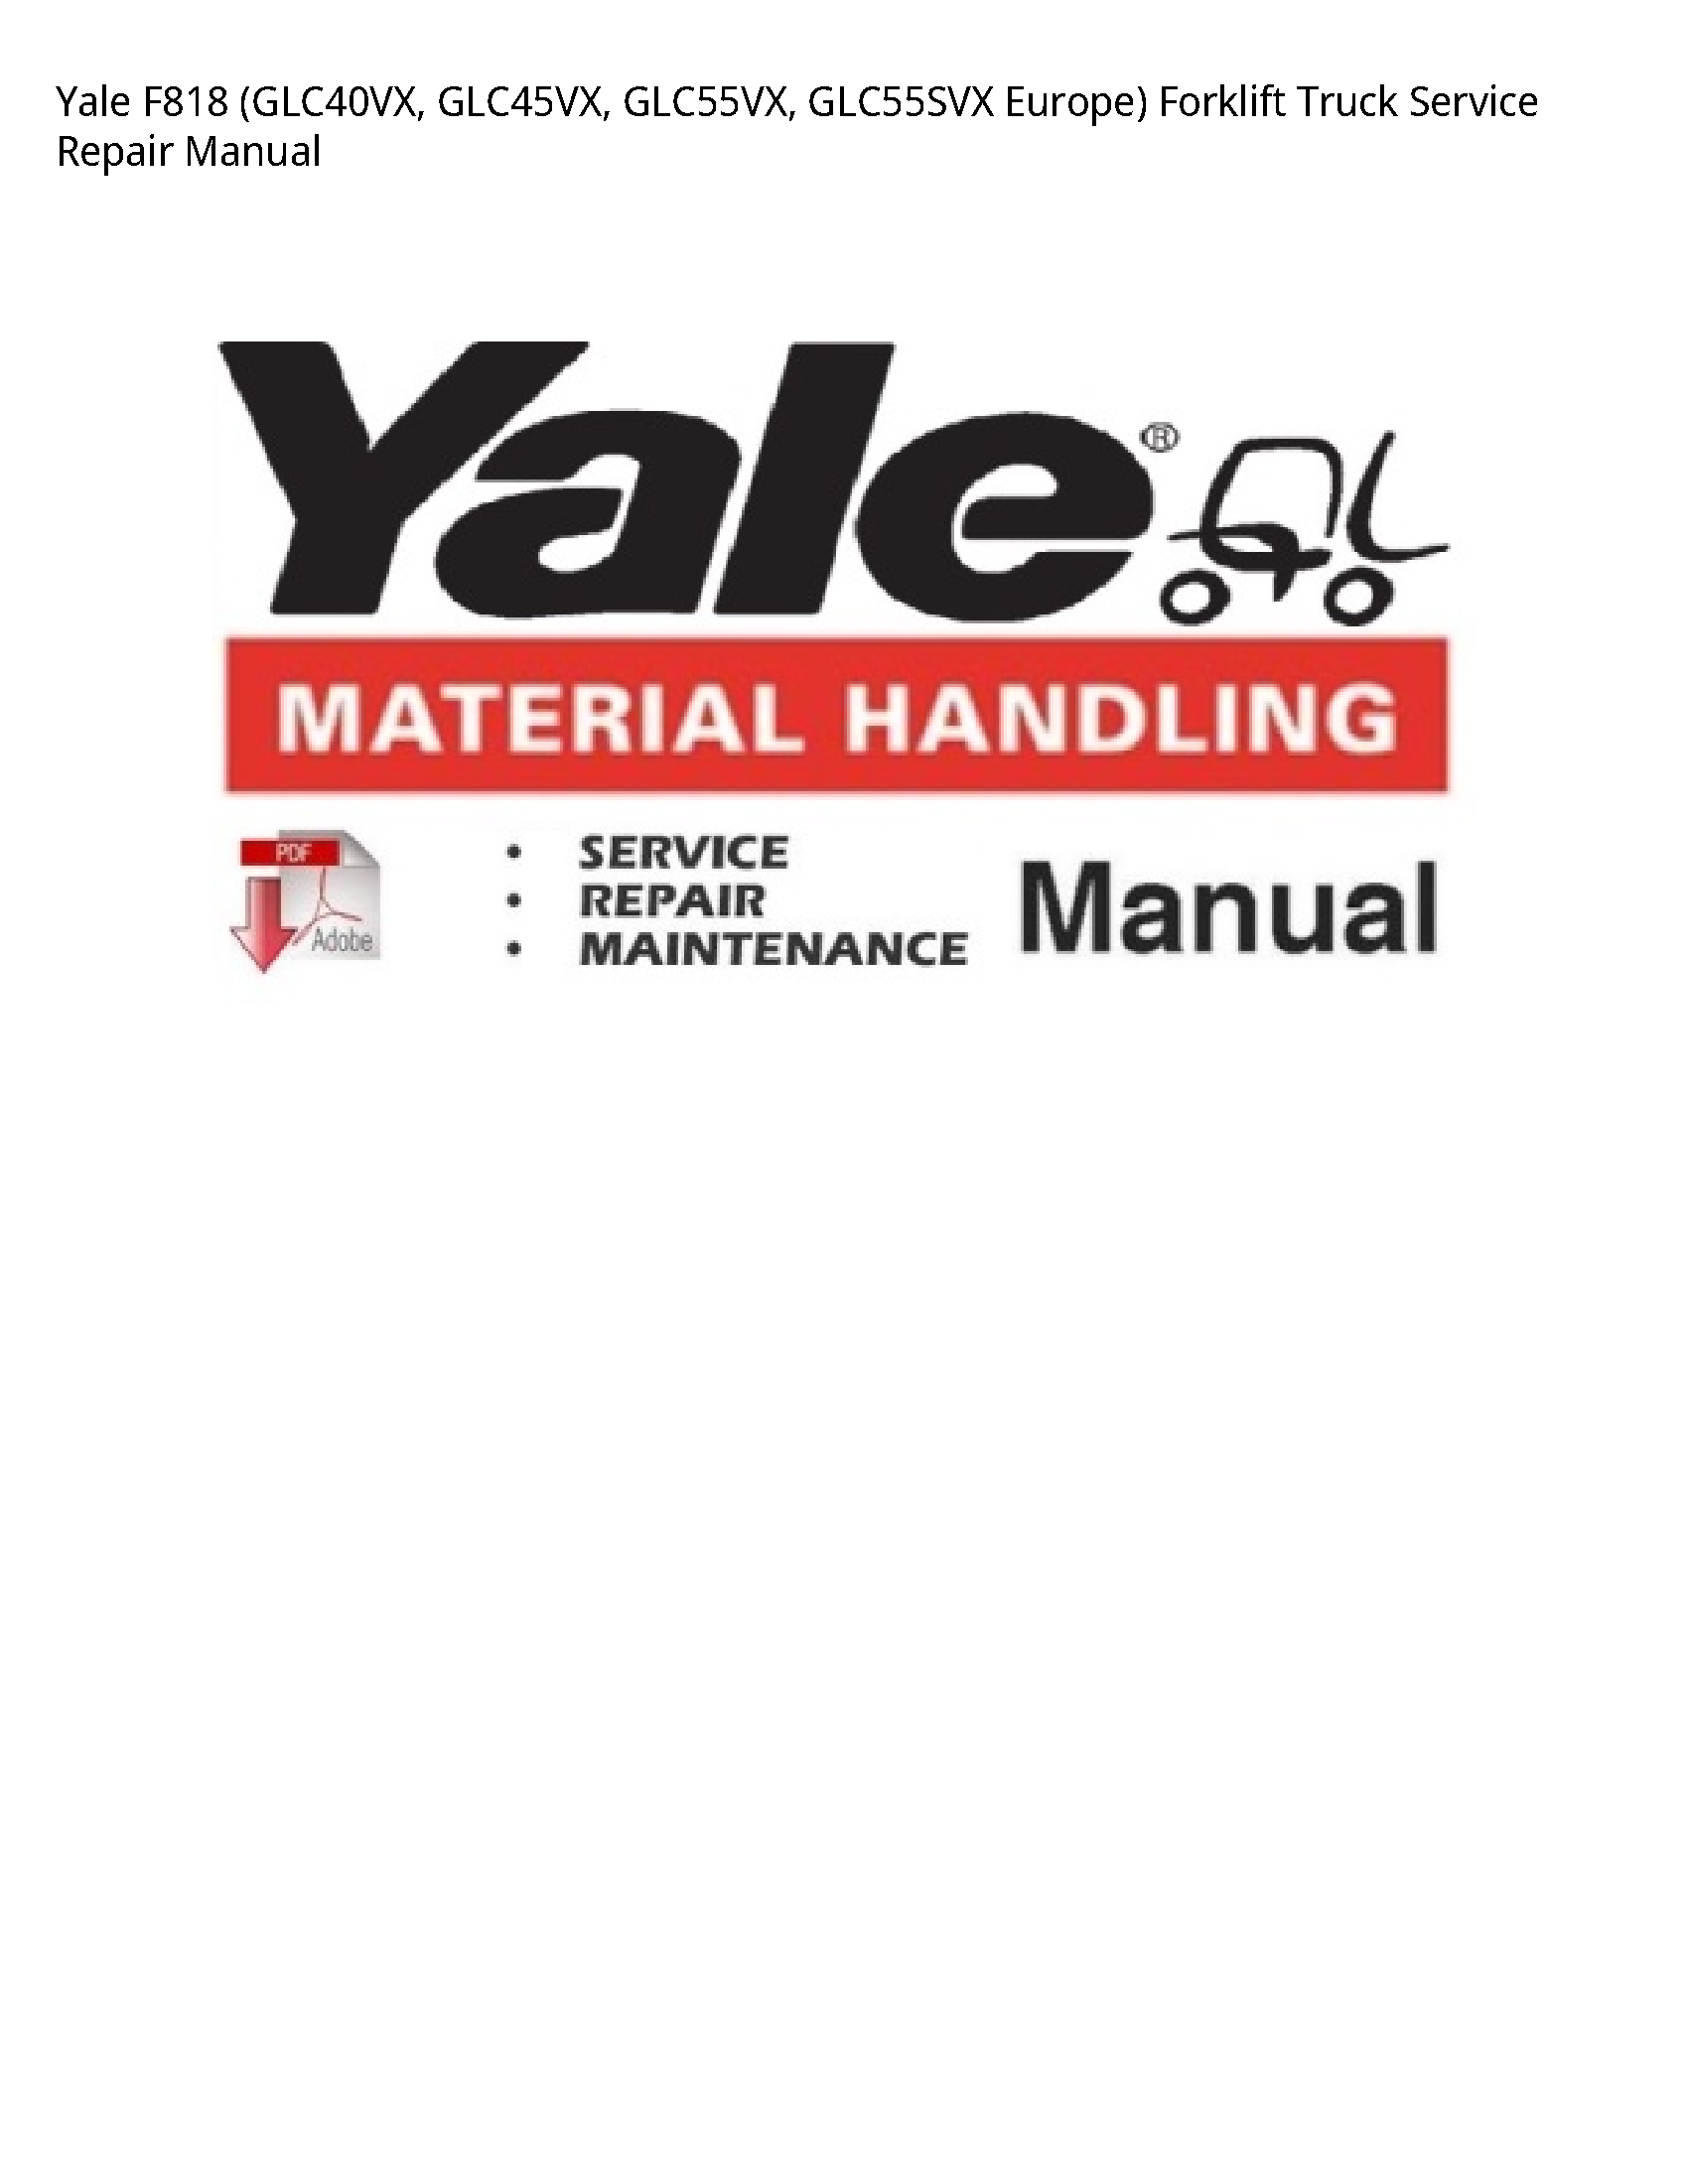 Yale F818 Europe) Forklift Truck manual